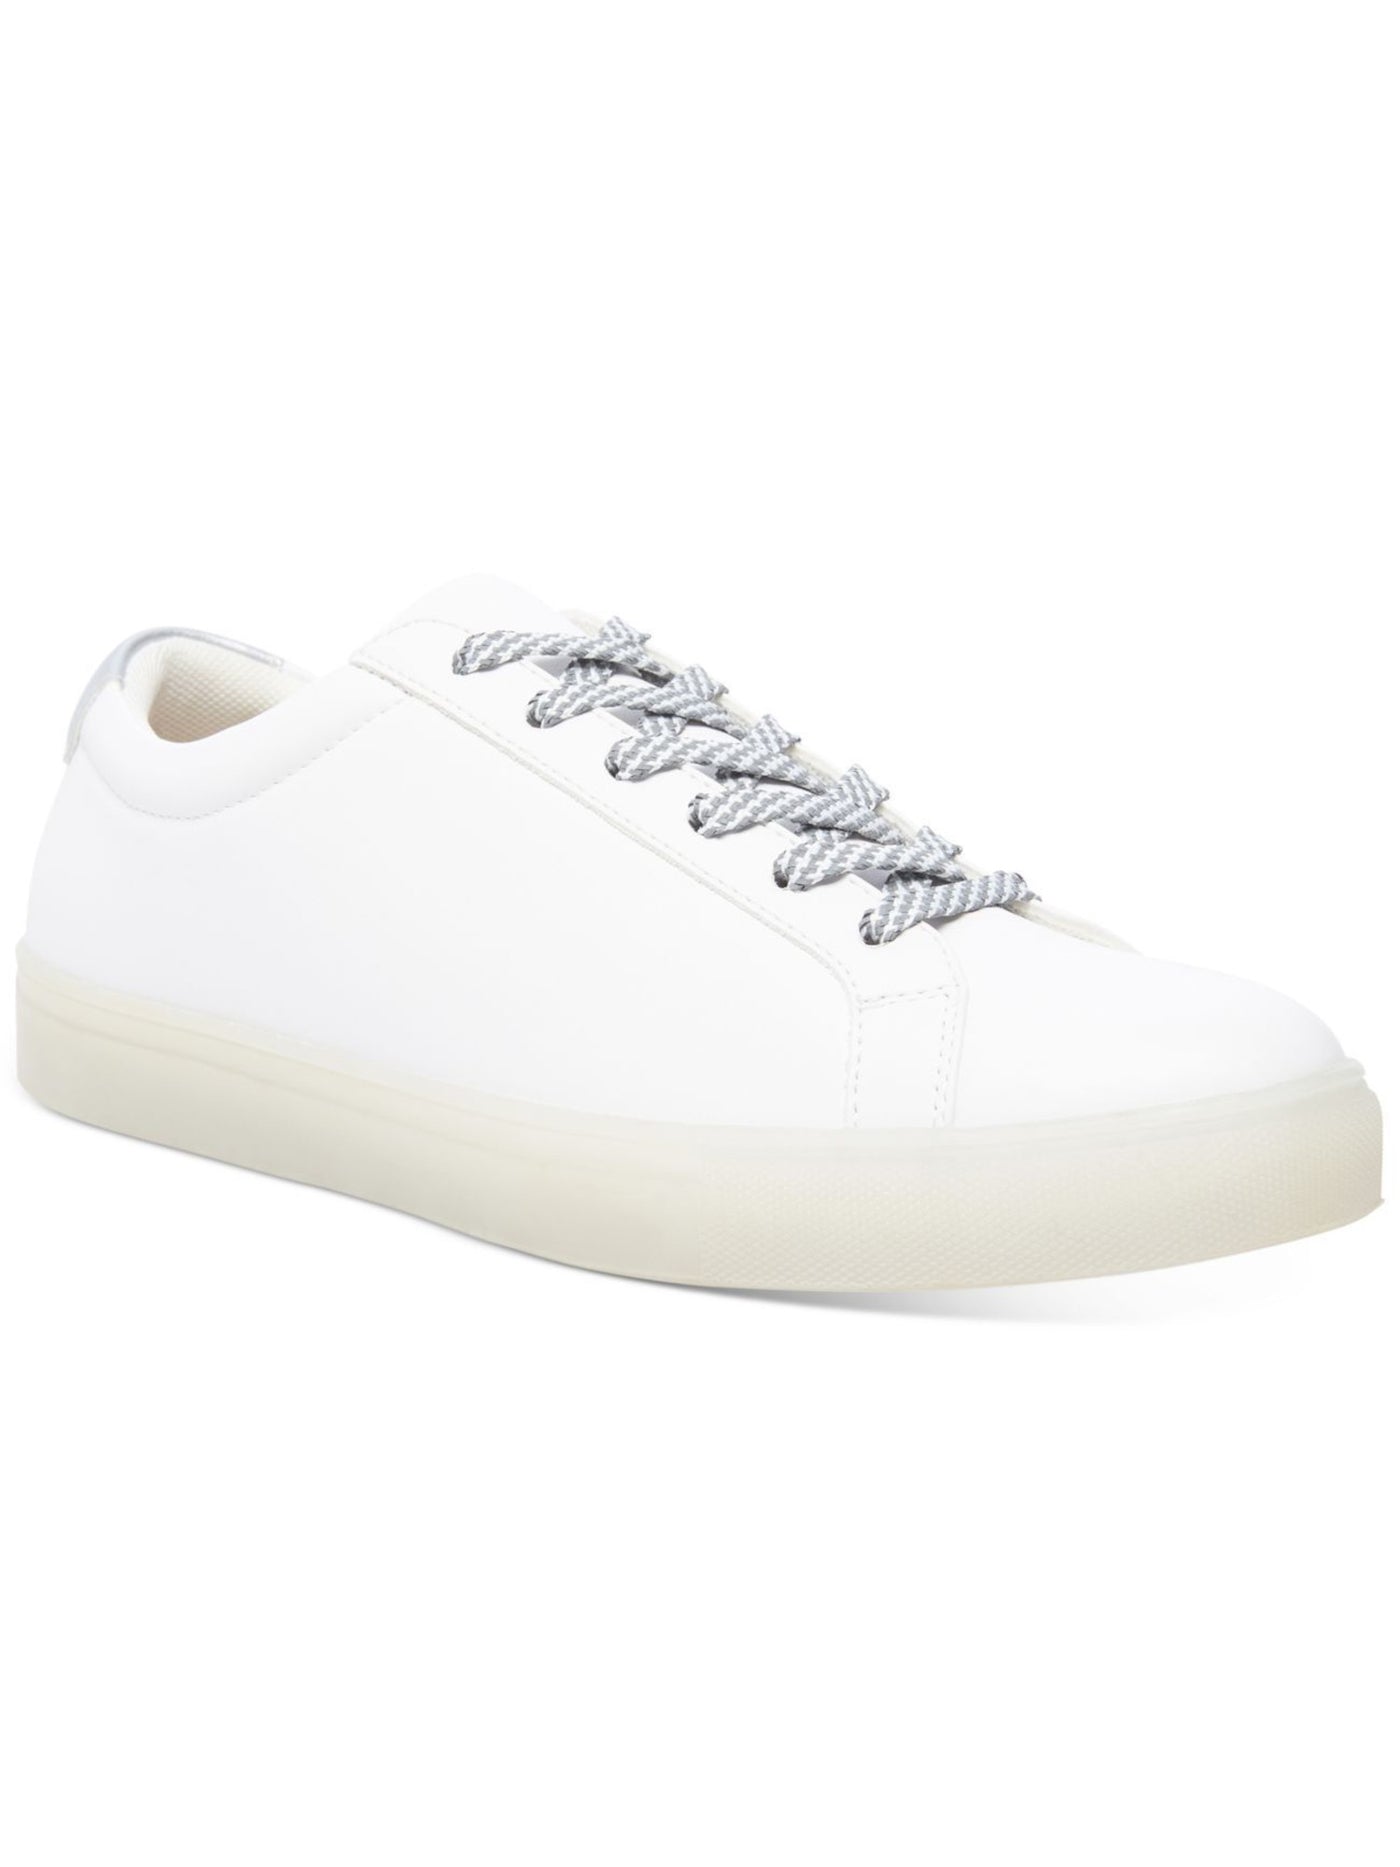 MADDEN Mens White Tennis-Style Padded Paule Round Toe Lace-Up Sneakers Shoes 12 M